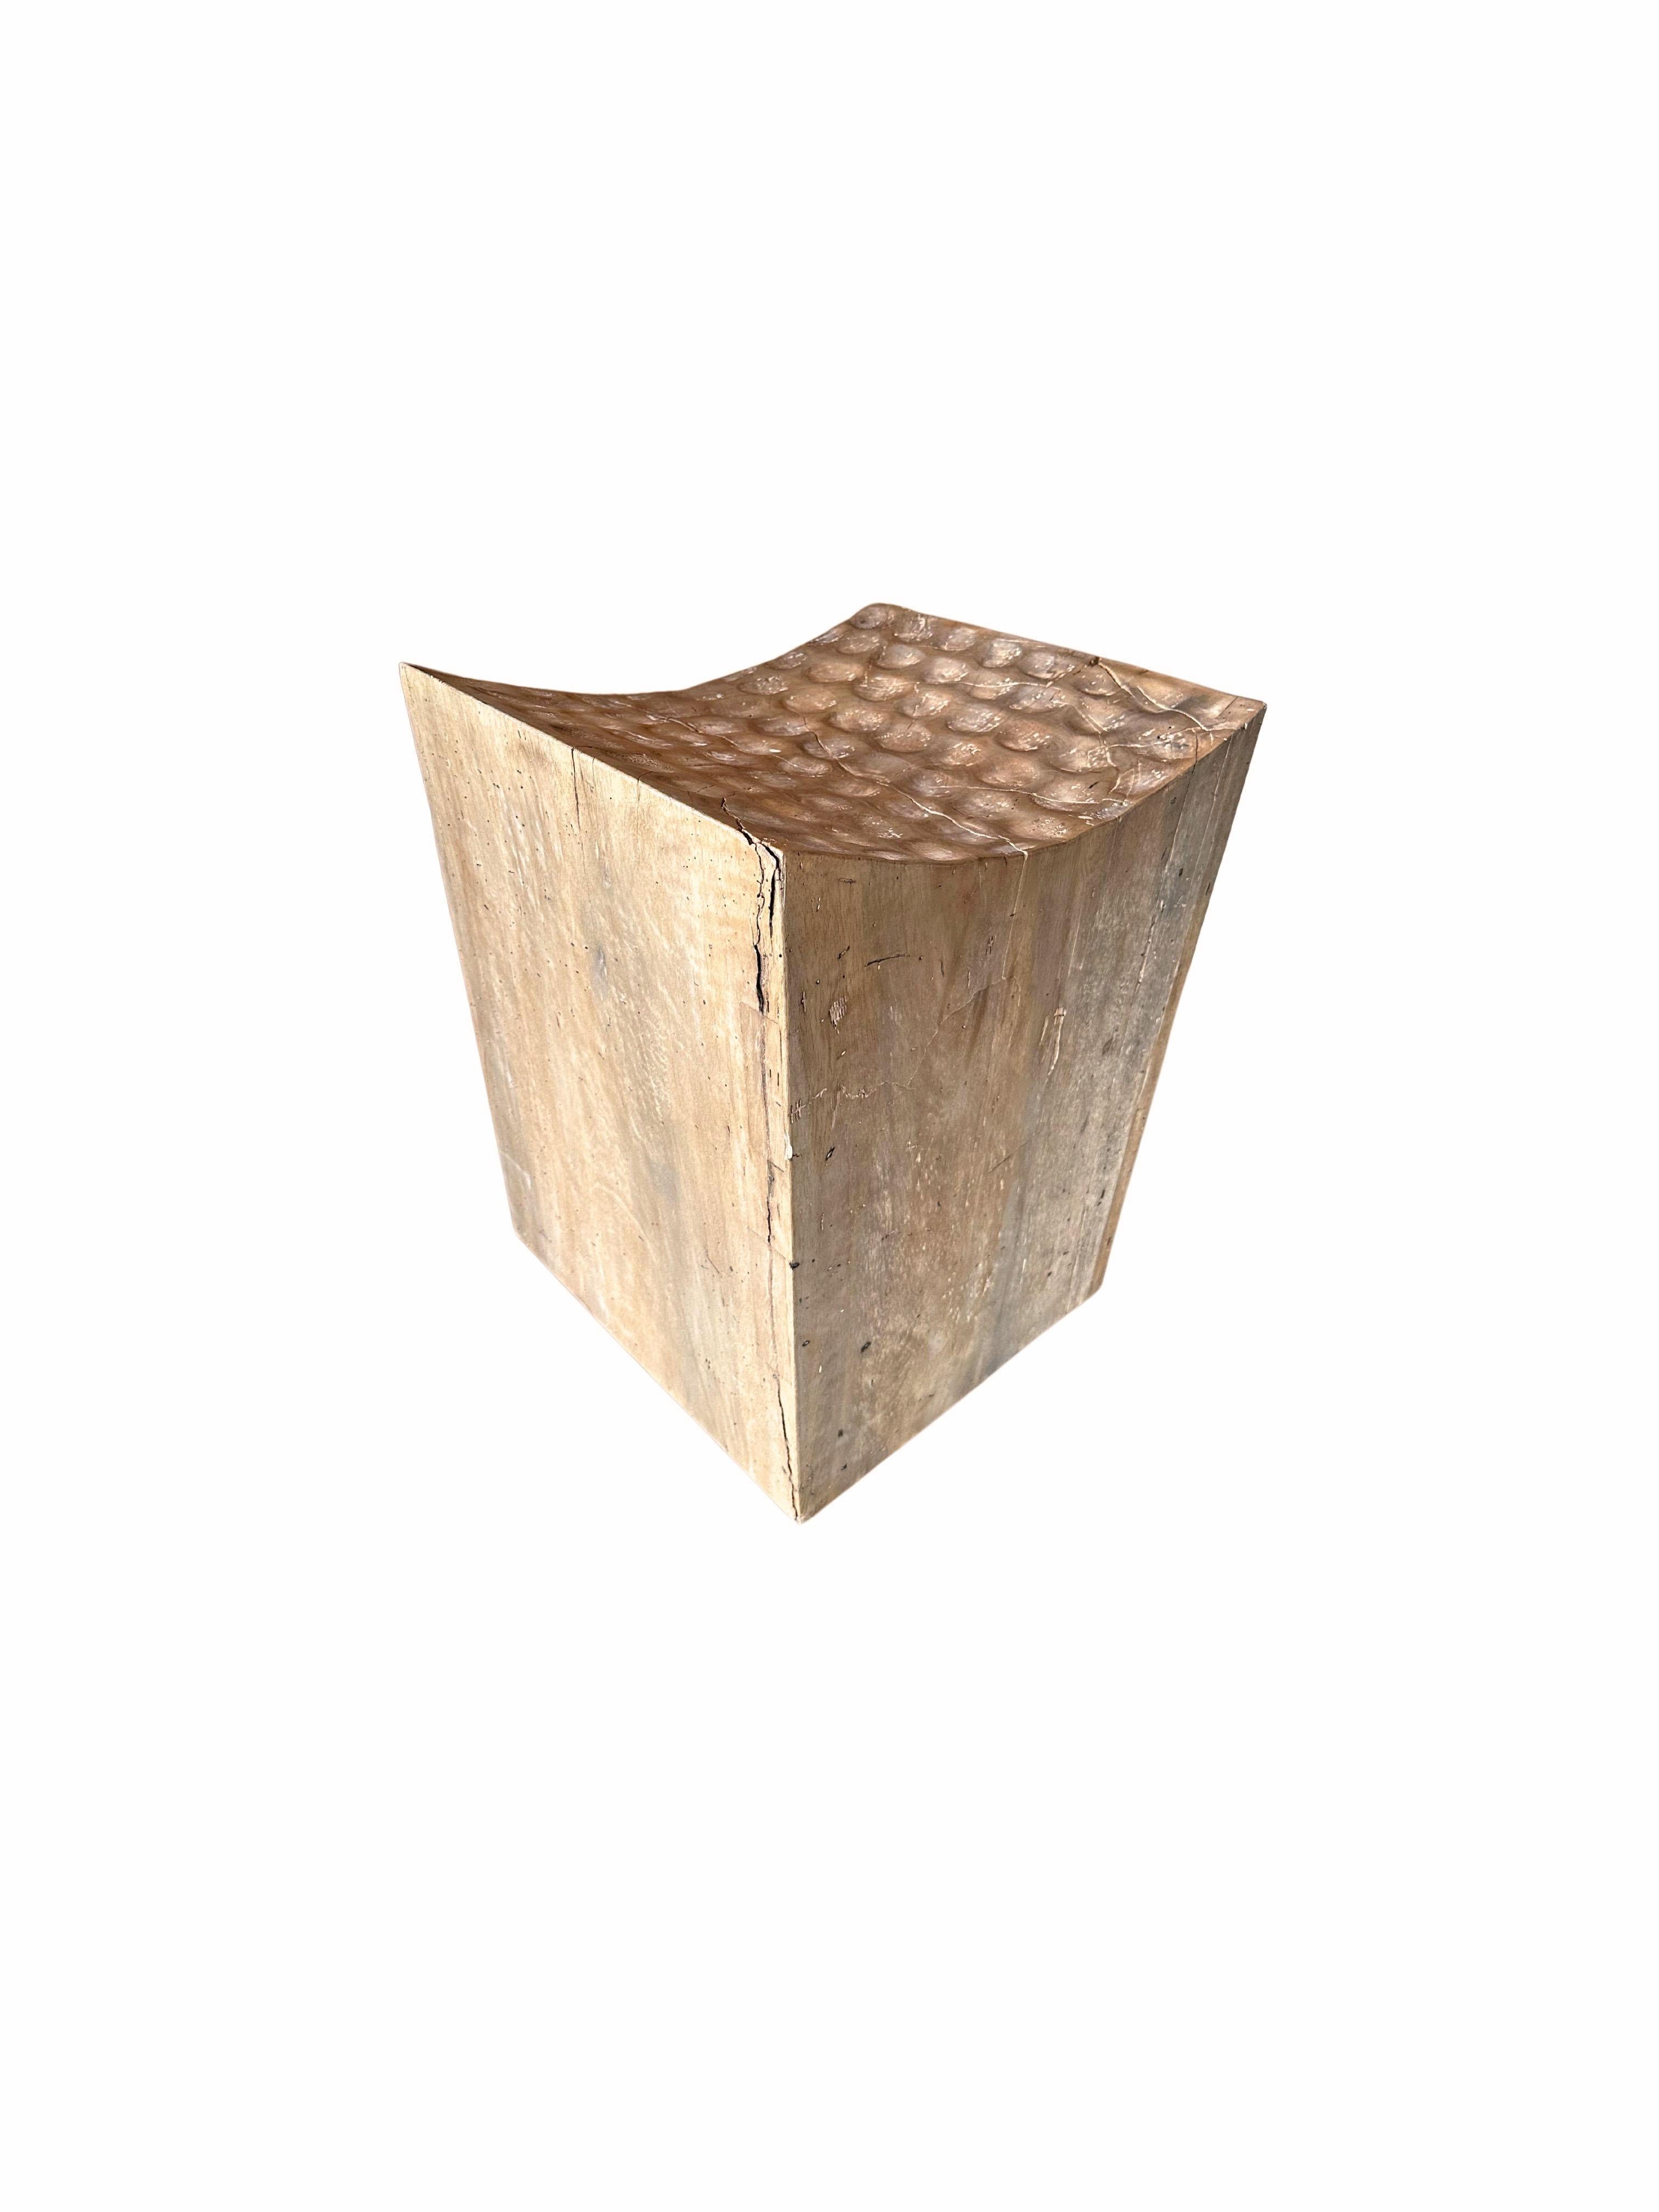 Sculptural Stool Carved from Solid Mango Wood Modern Organic In Good Condition For Sale In Jimbaran, Bali